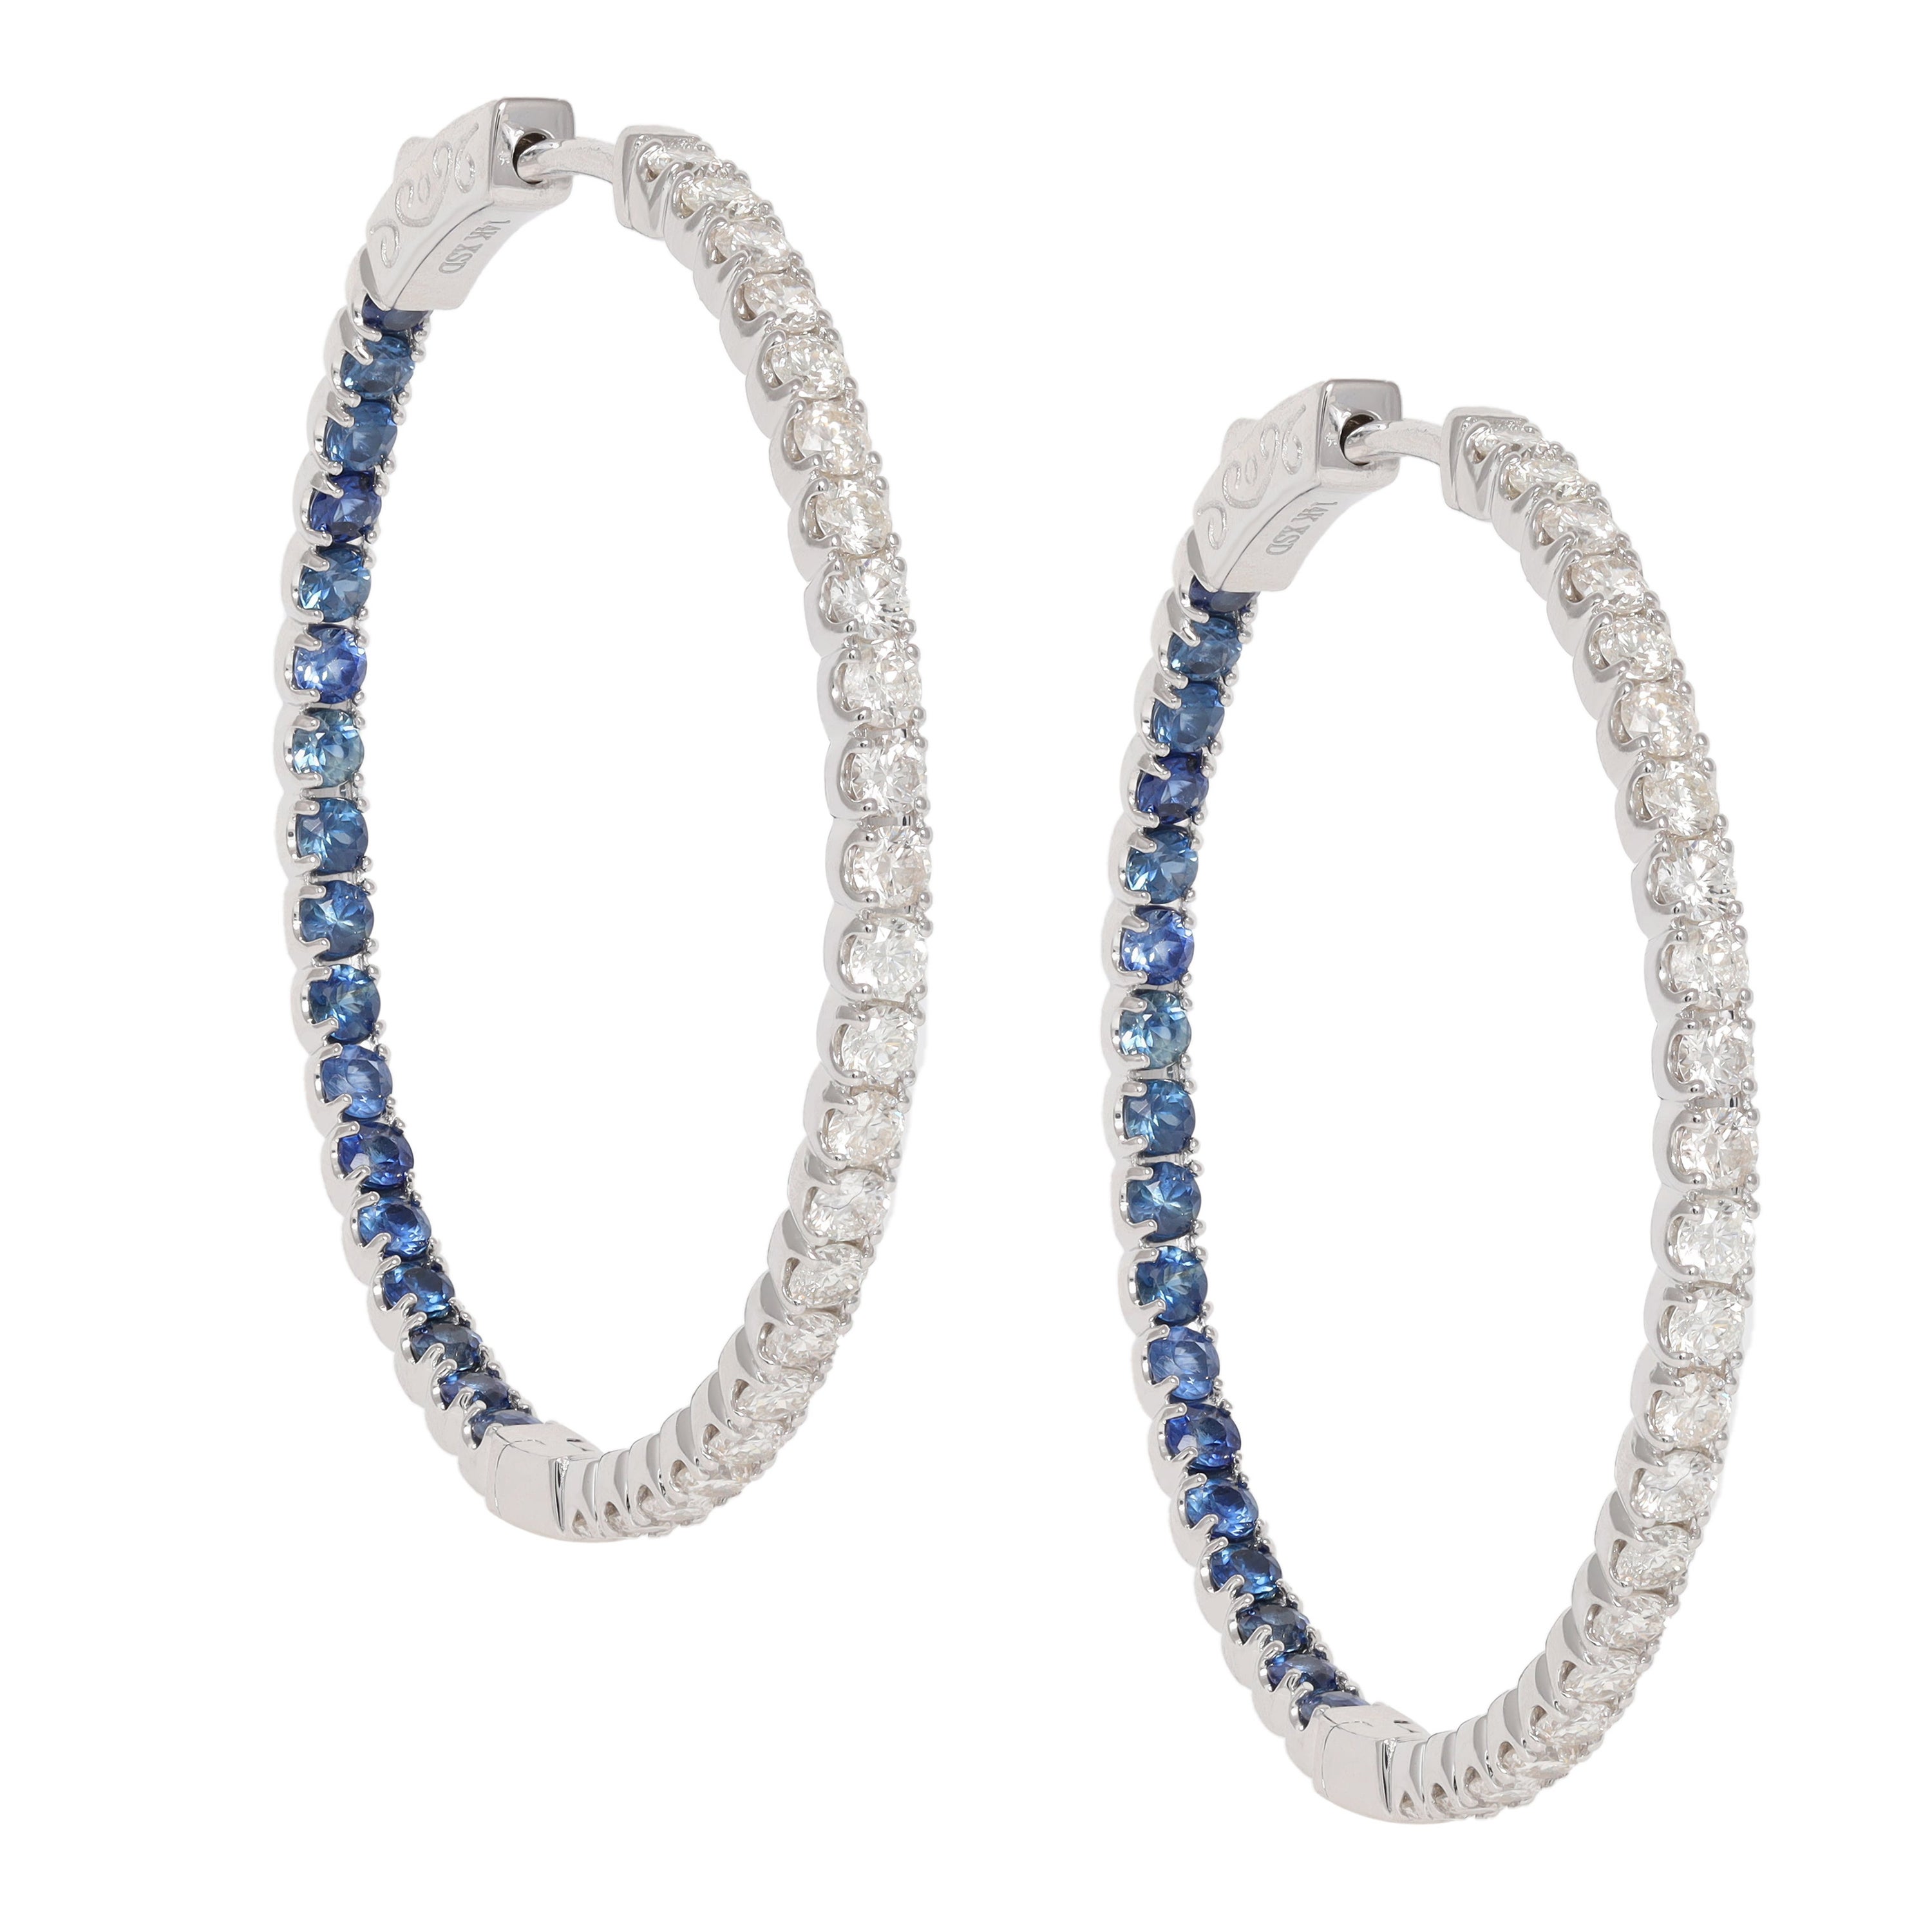 Enchanting 14k White Gold Snake Hoop Earrings with Green and White ...